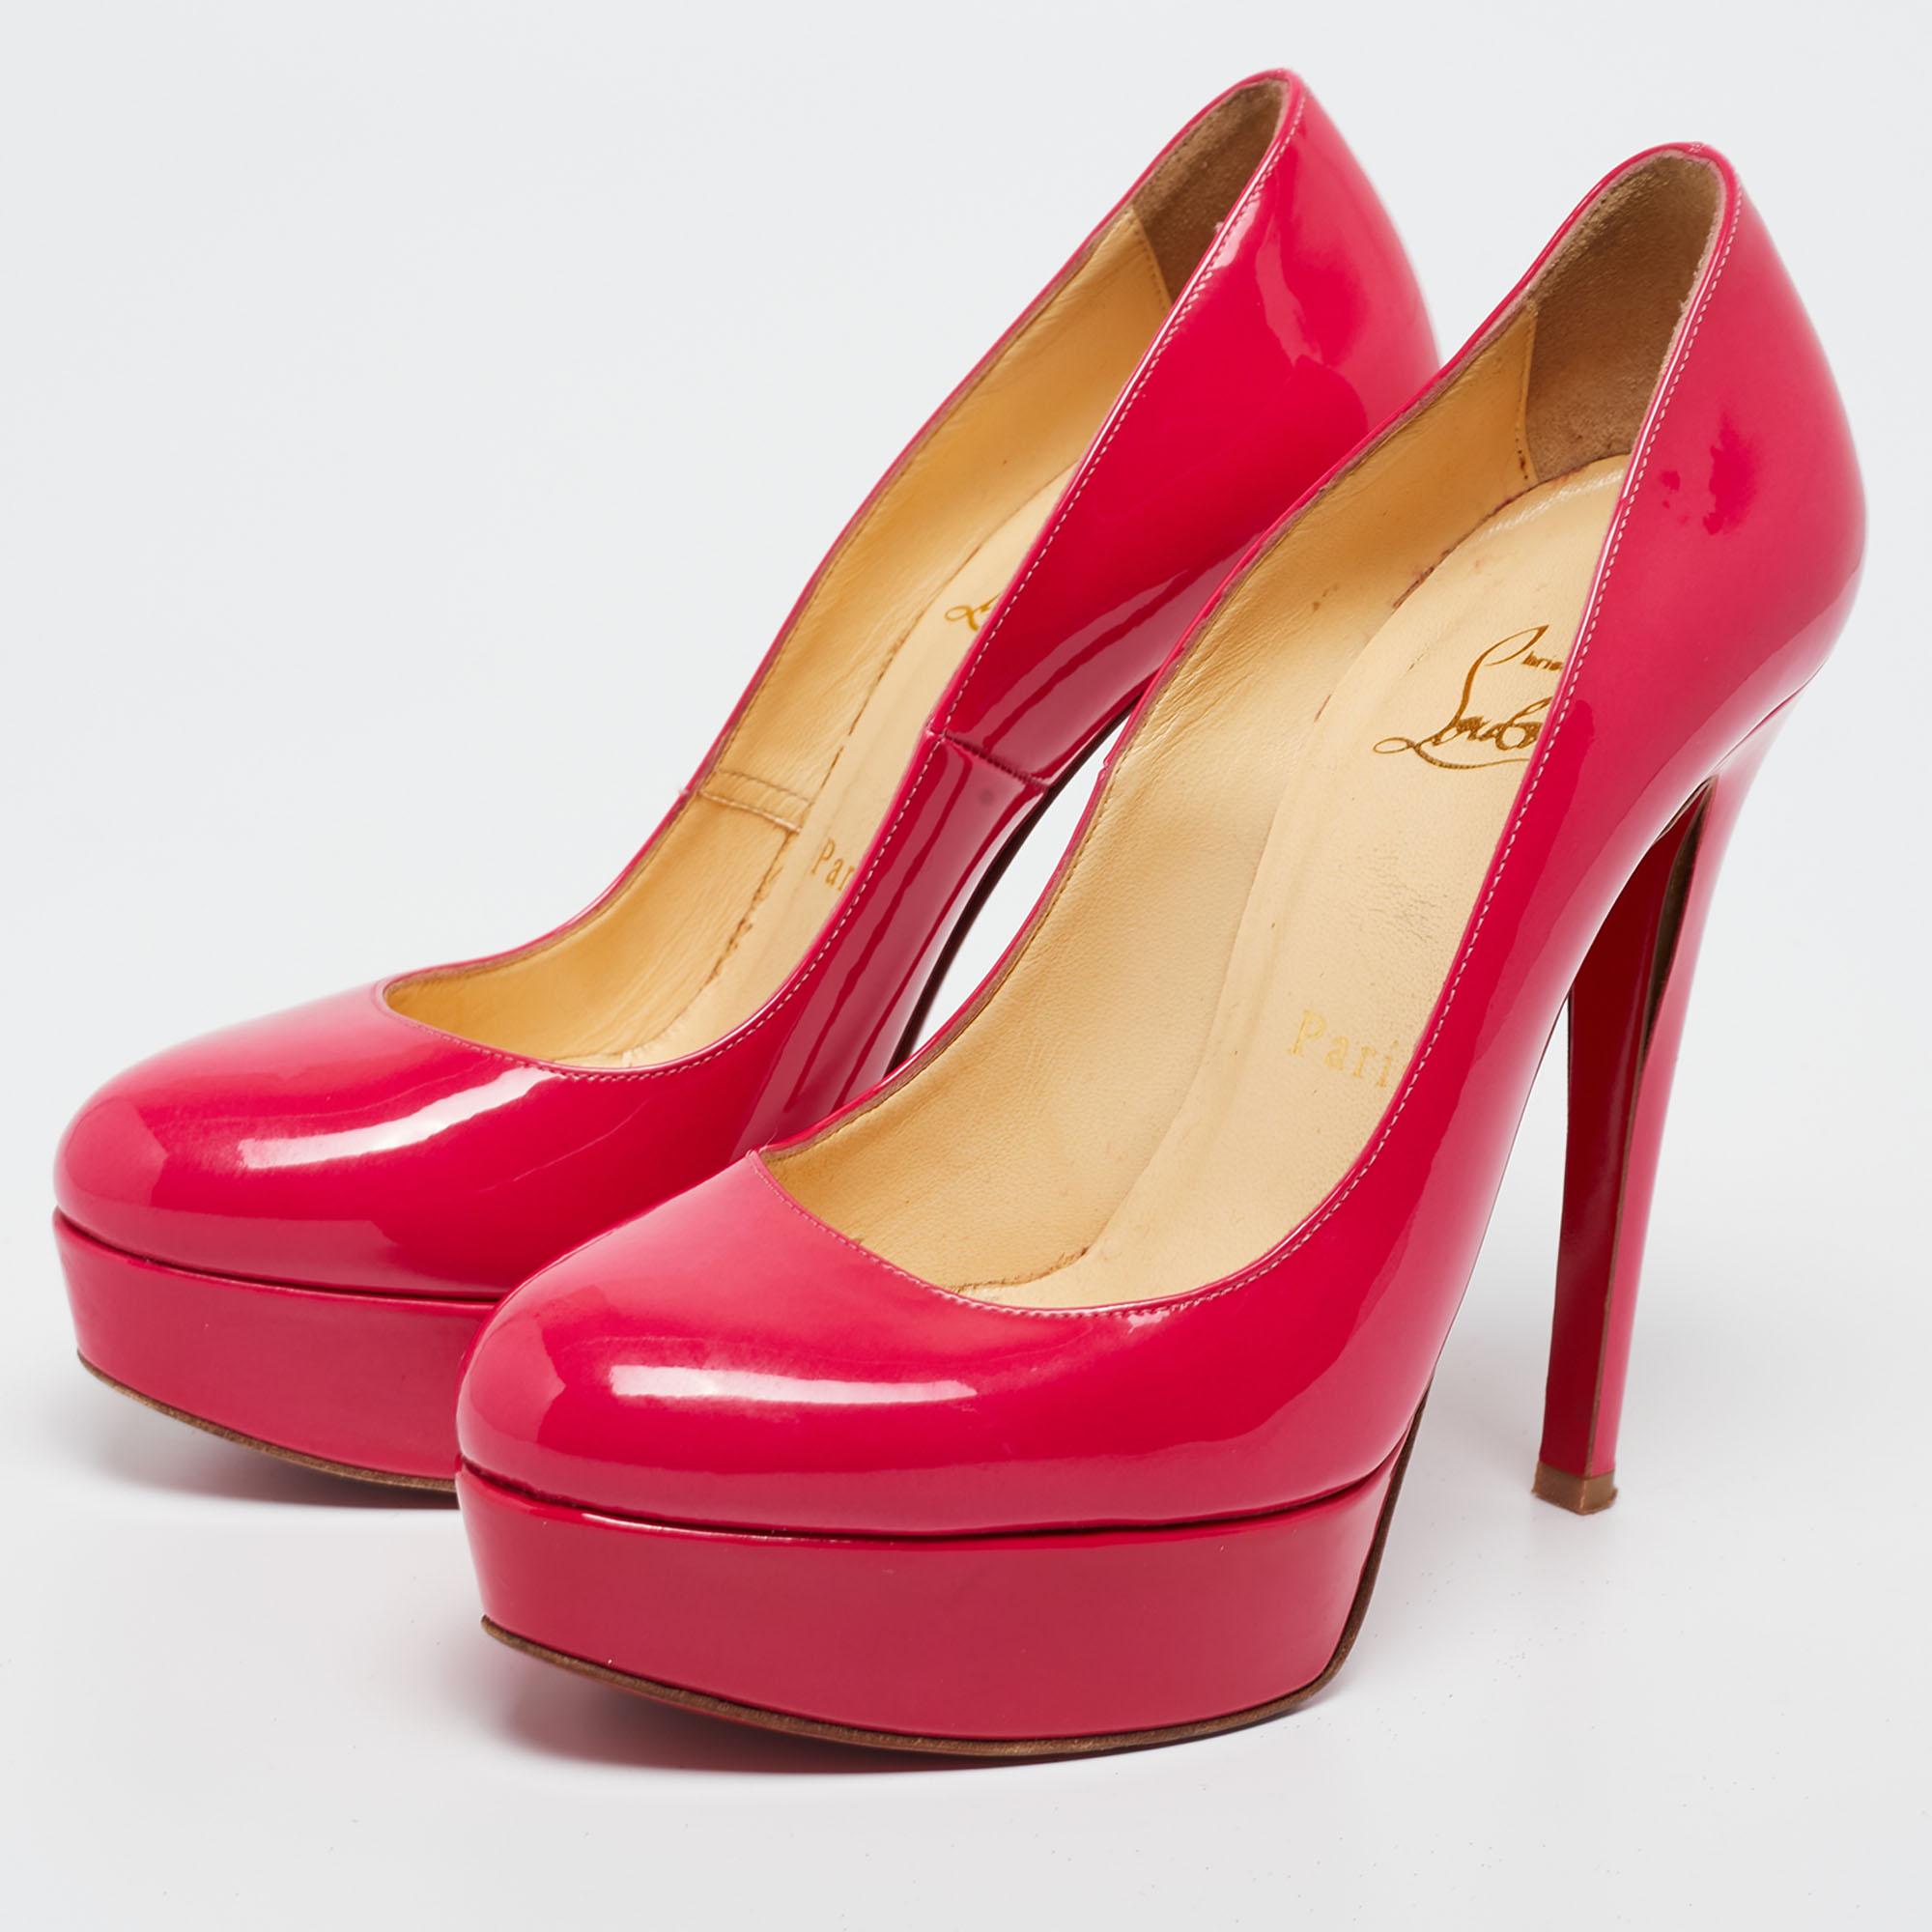 Christian Louboutin Neon Pink Patent Leather Bianca Pumps Size 36 For Sale 4